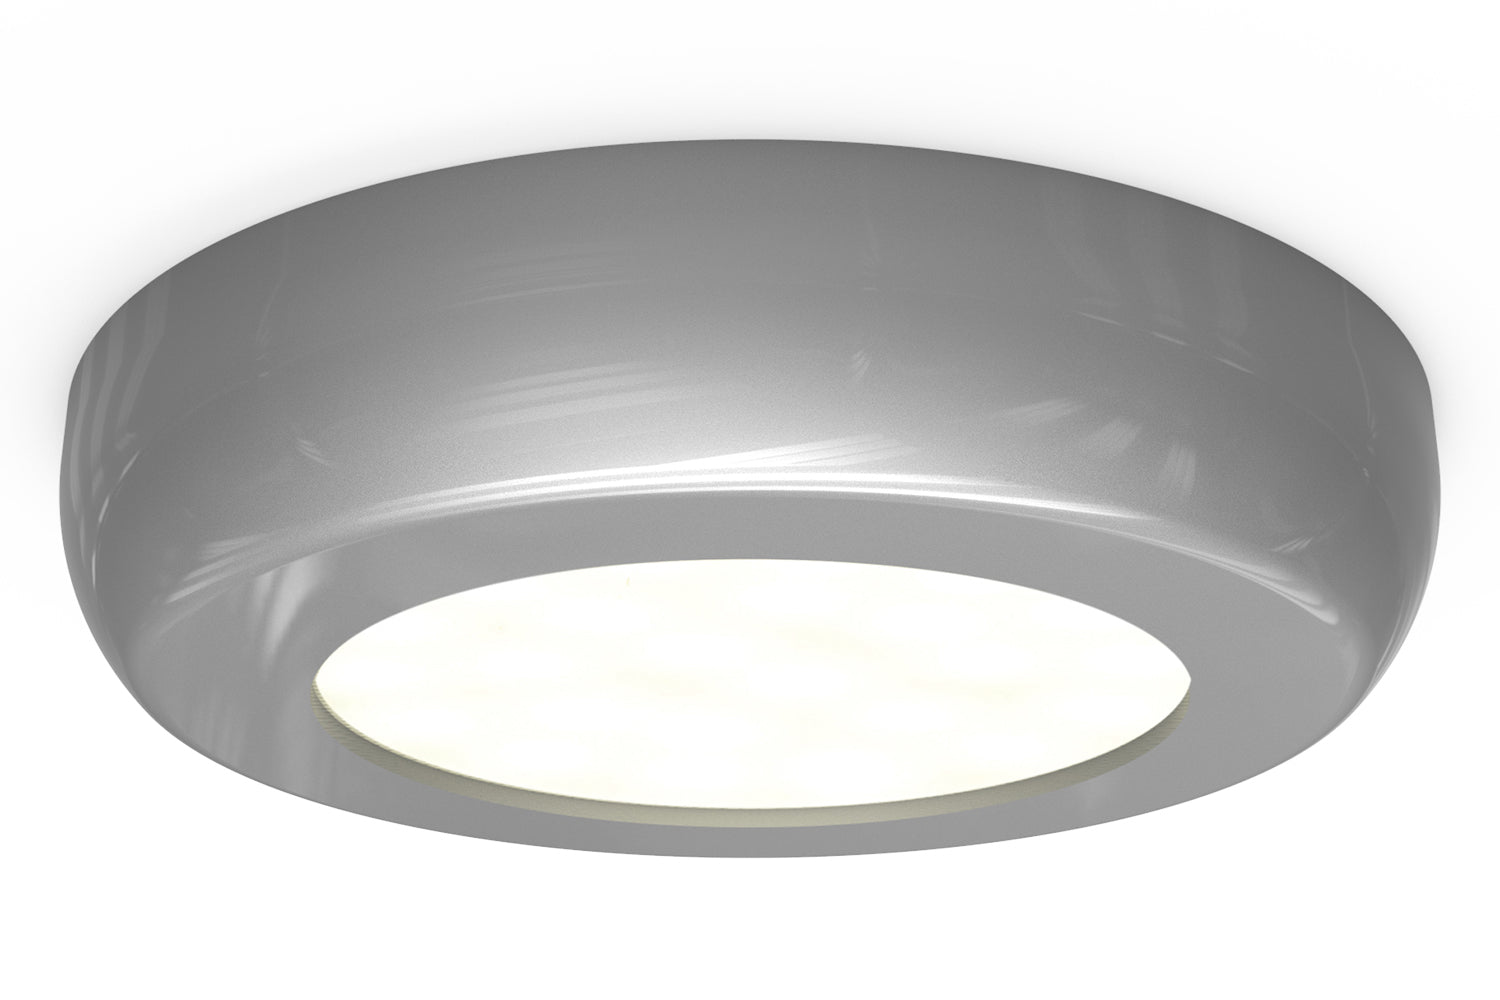 4lite Mains Powered Circle Cabinet LED Light - Silver (Single)